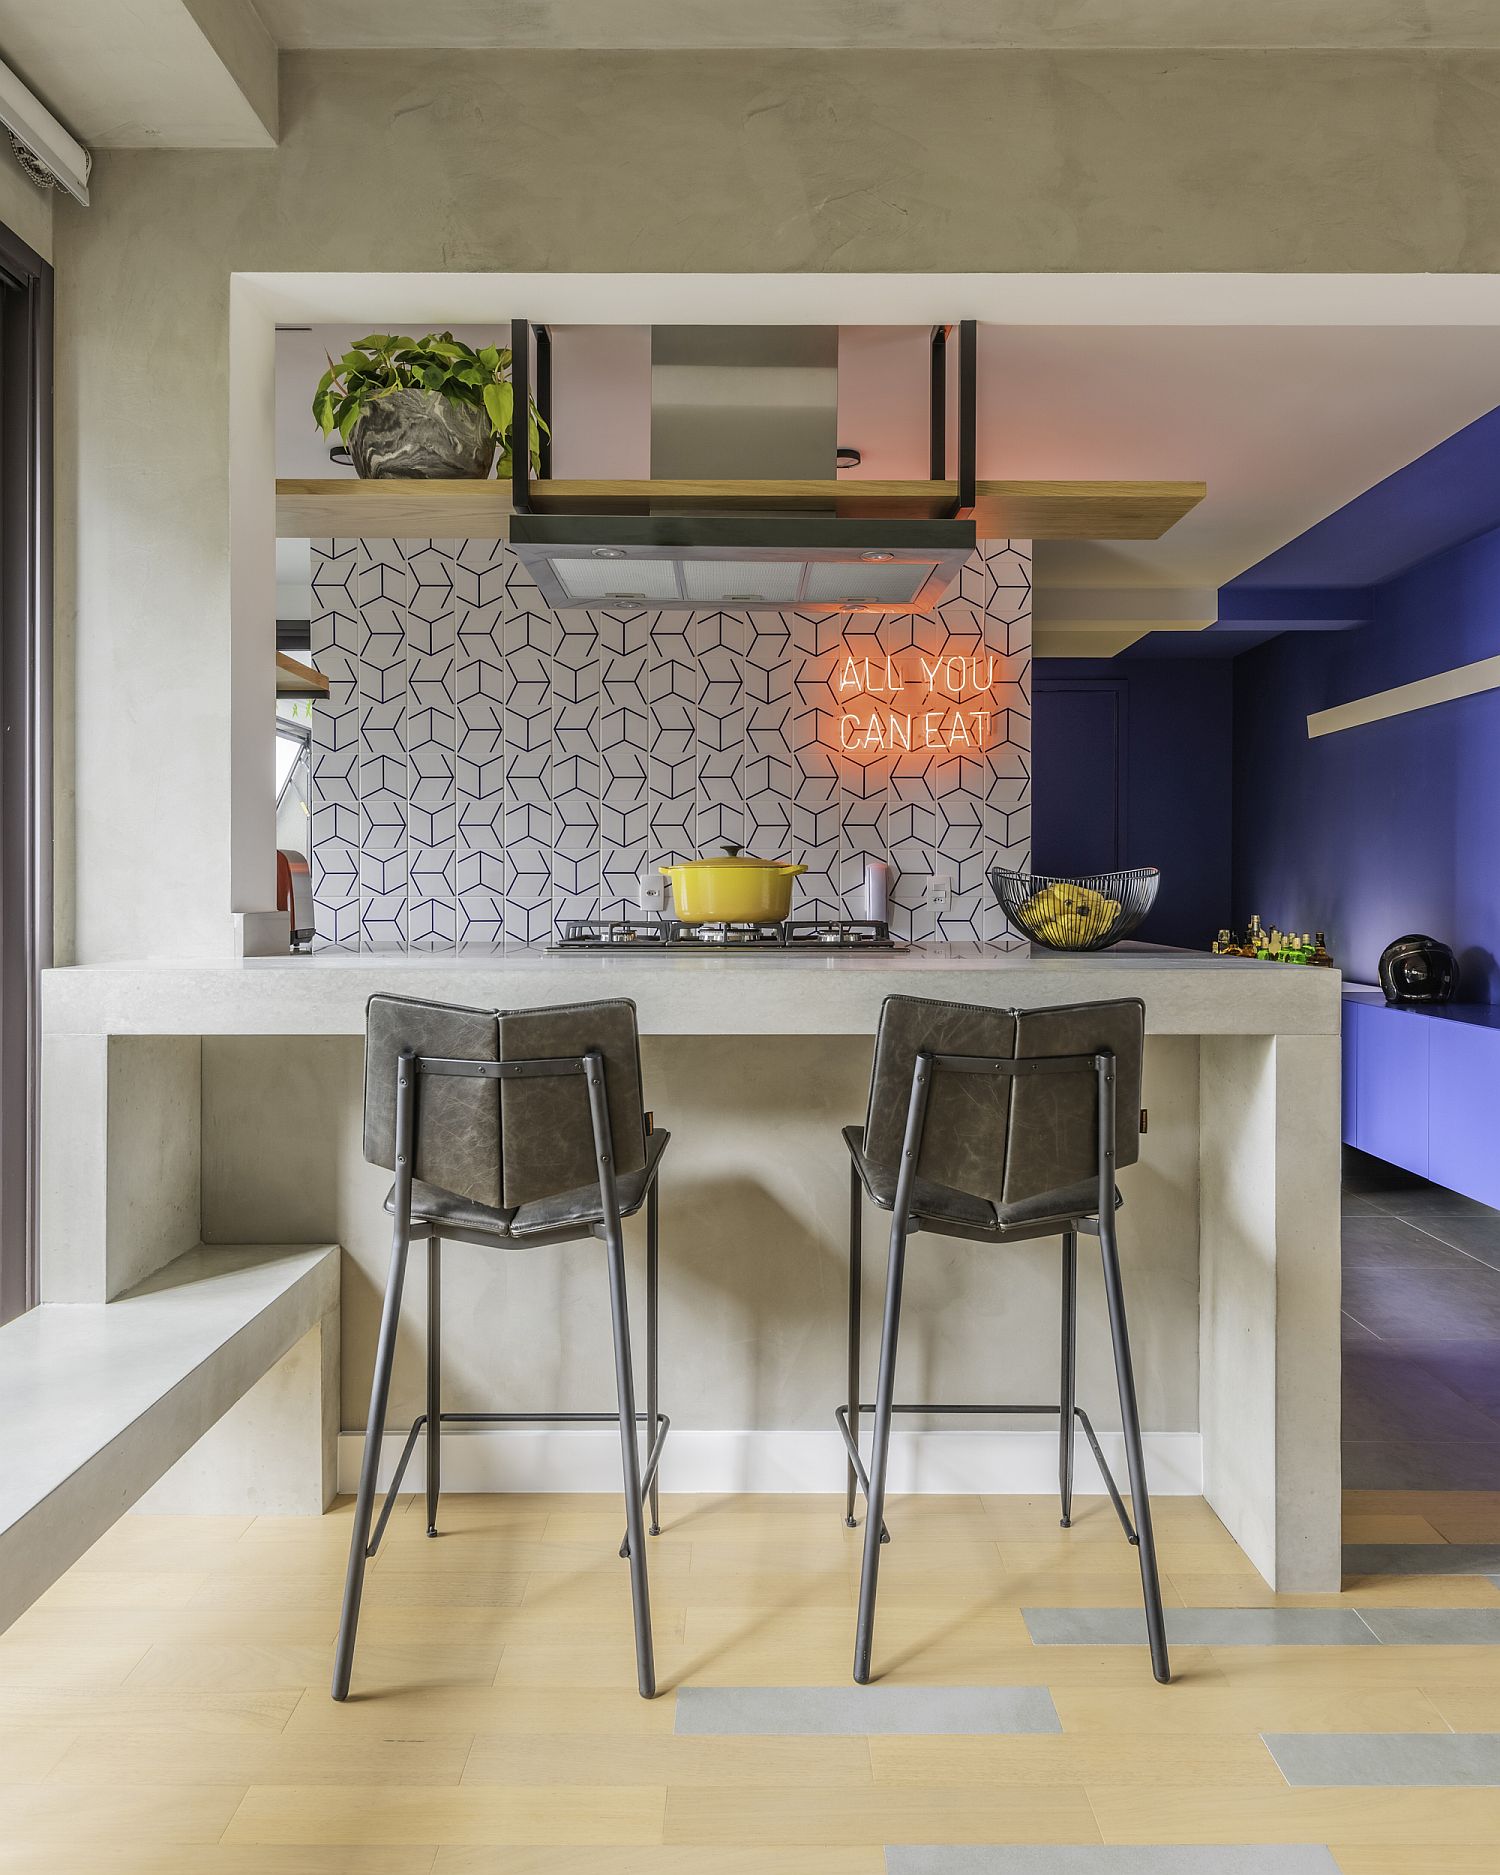 Bright neon sign in the kitchen is a fun way to enliven the space